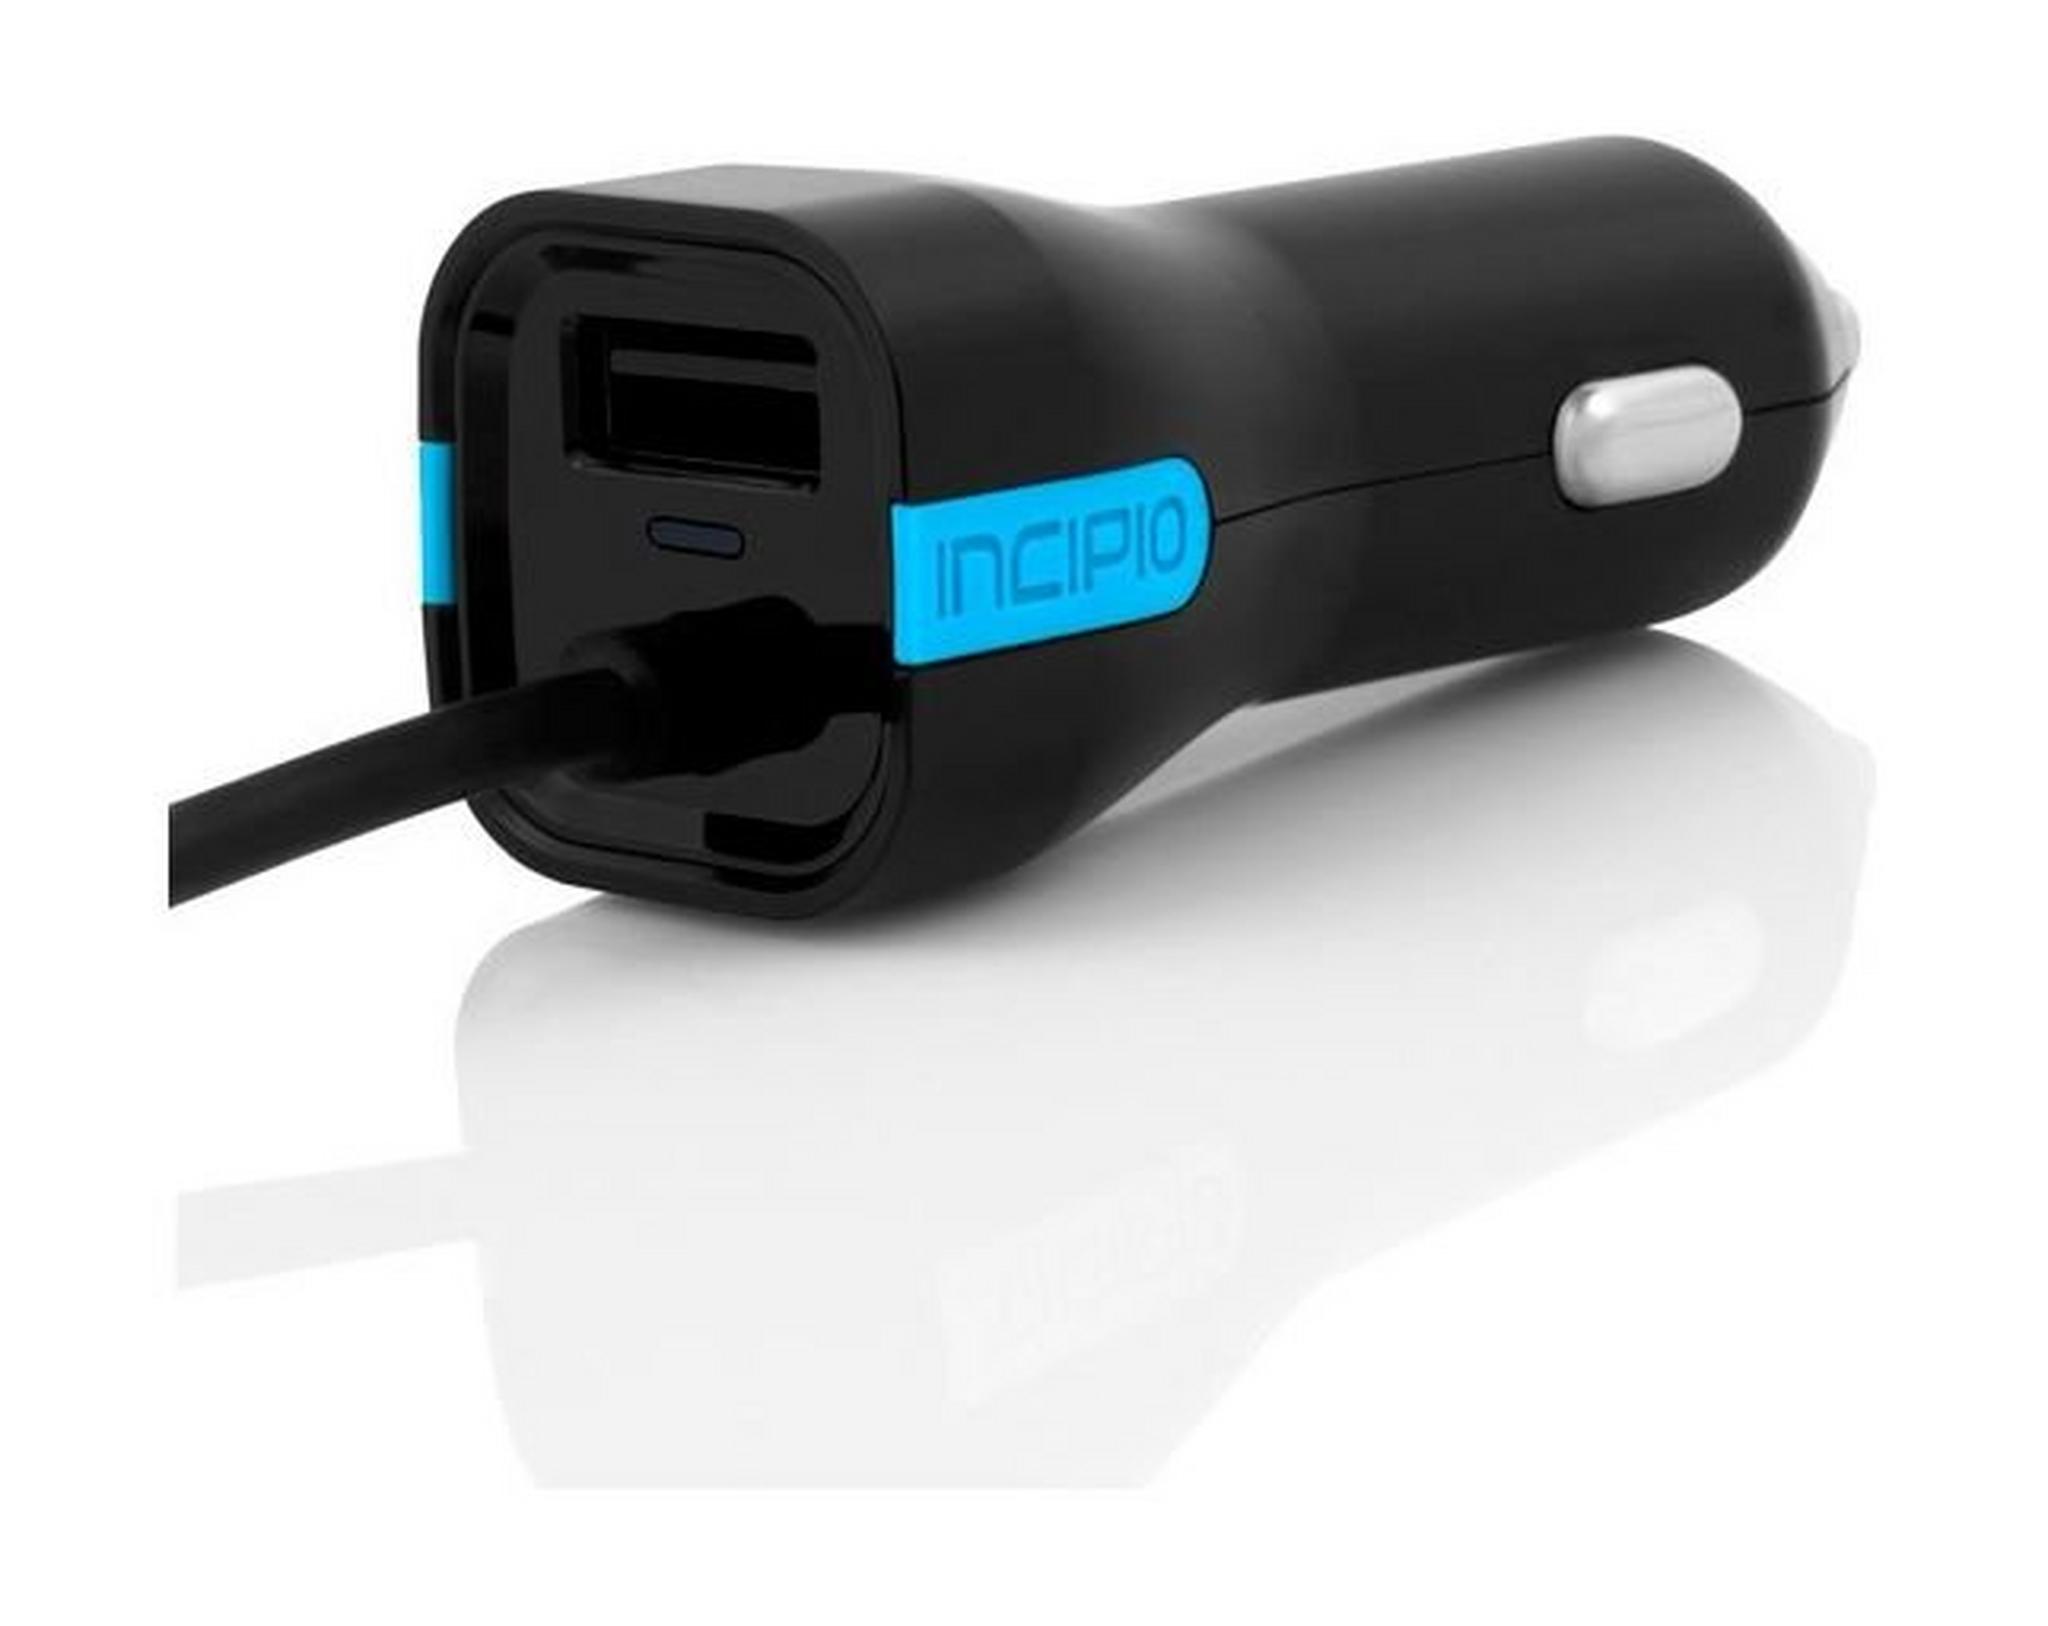 Incipio USB and Lightning 4.8 Amp Car Charger for Smartphones (ICP-PW171) - Black